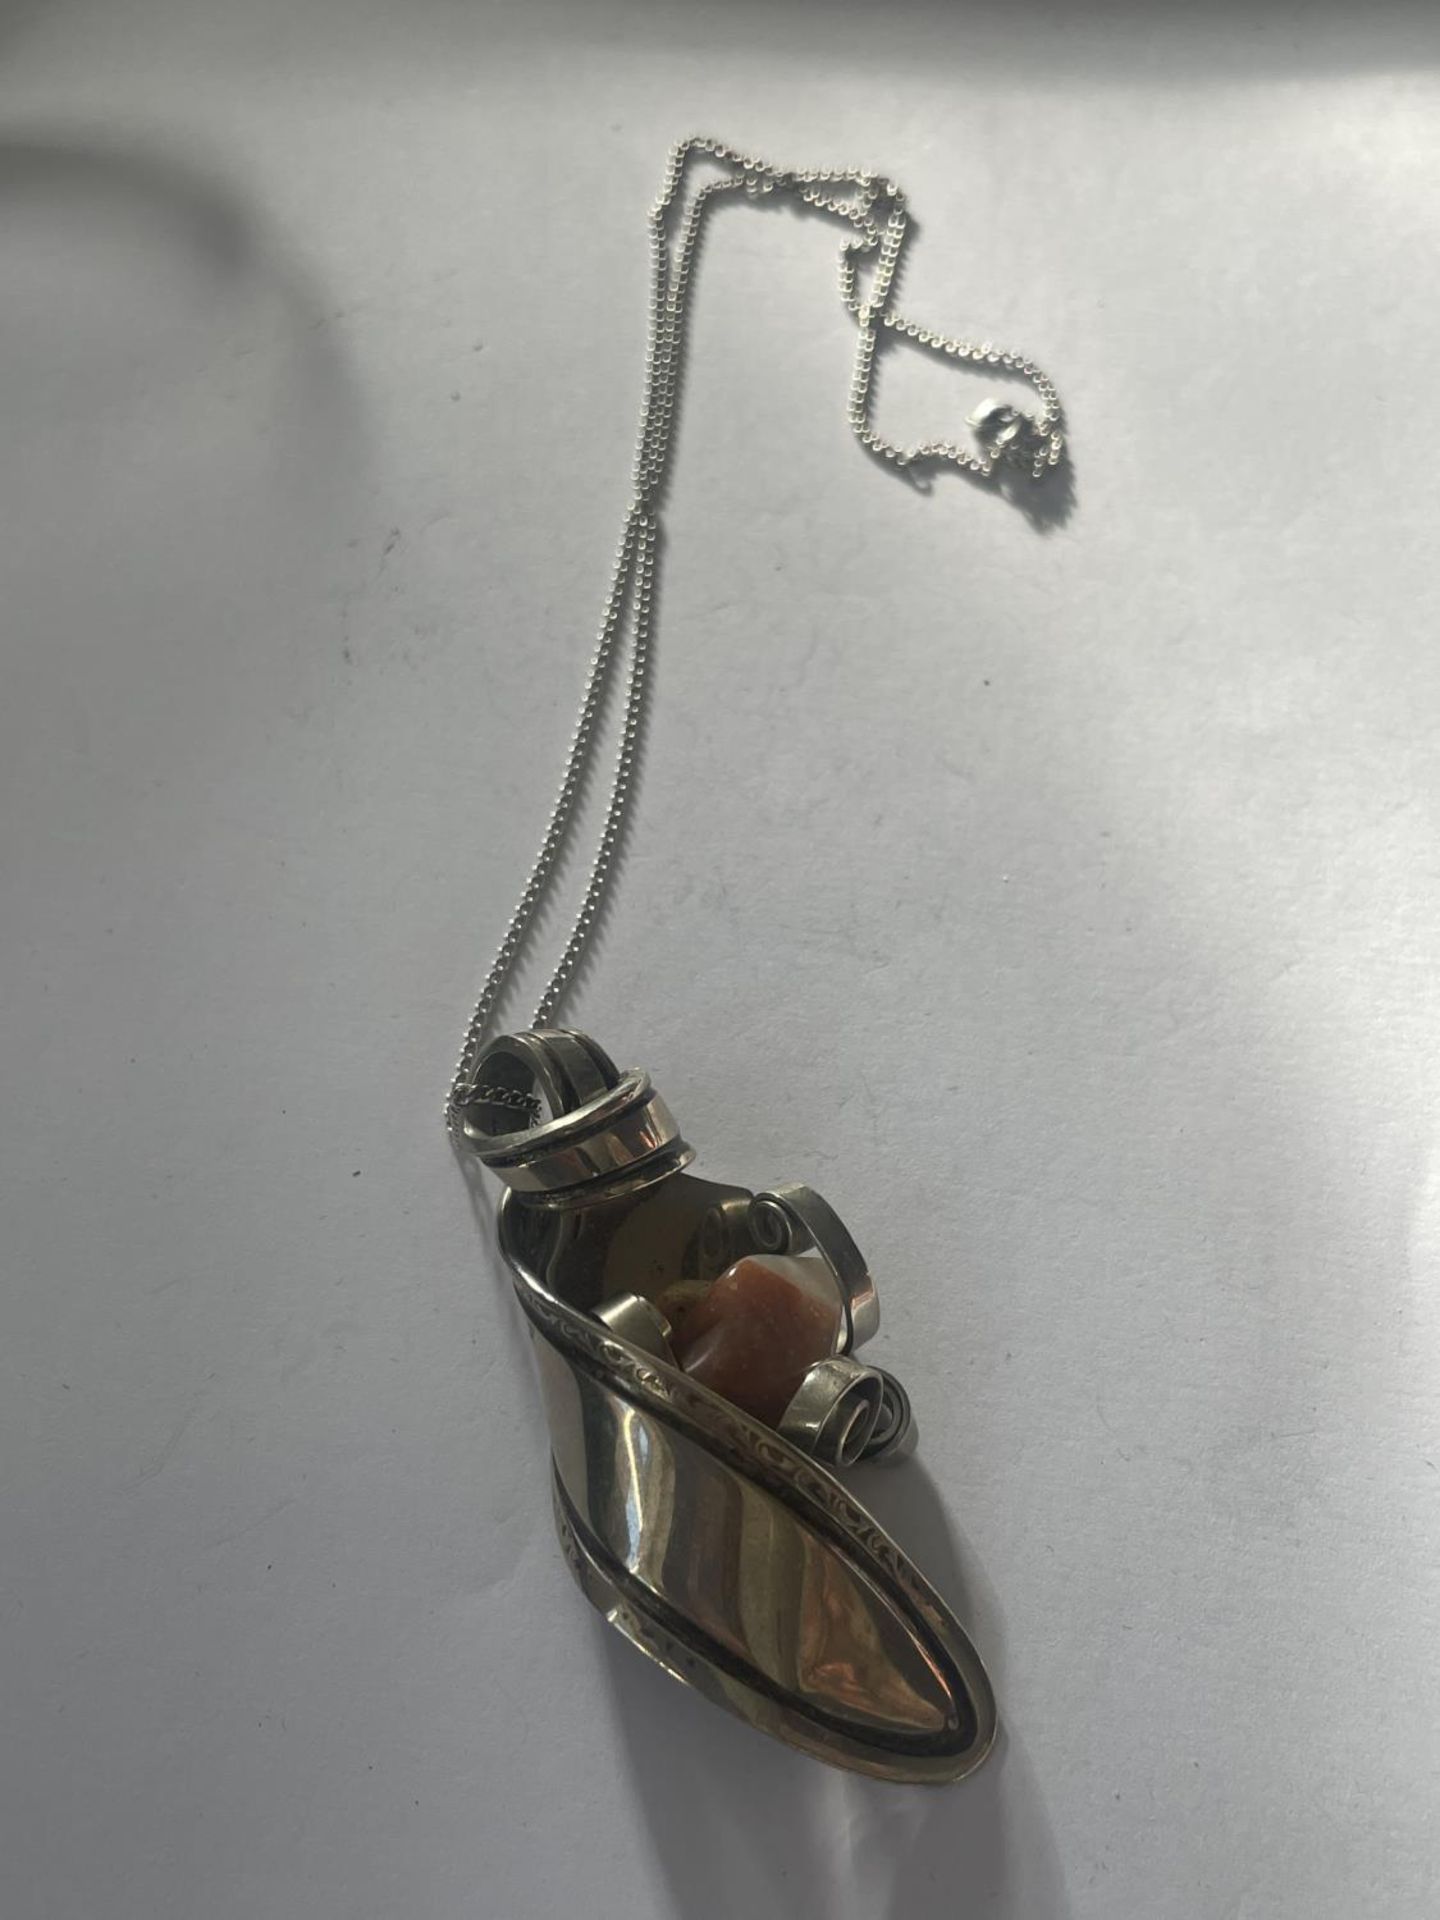 AN ORNATE WHITE METAL SPOON AND AGATE PENDANT